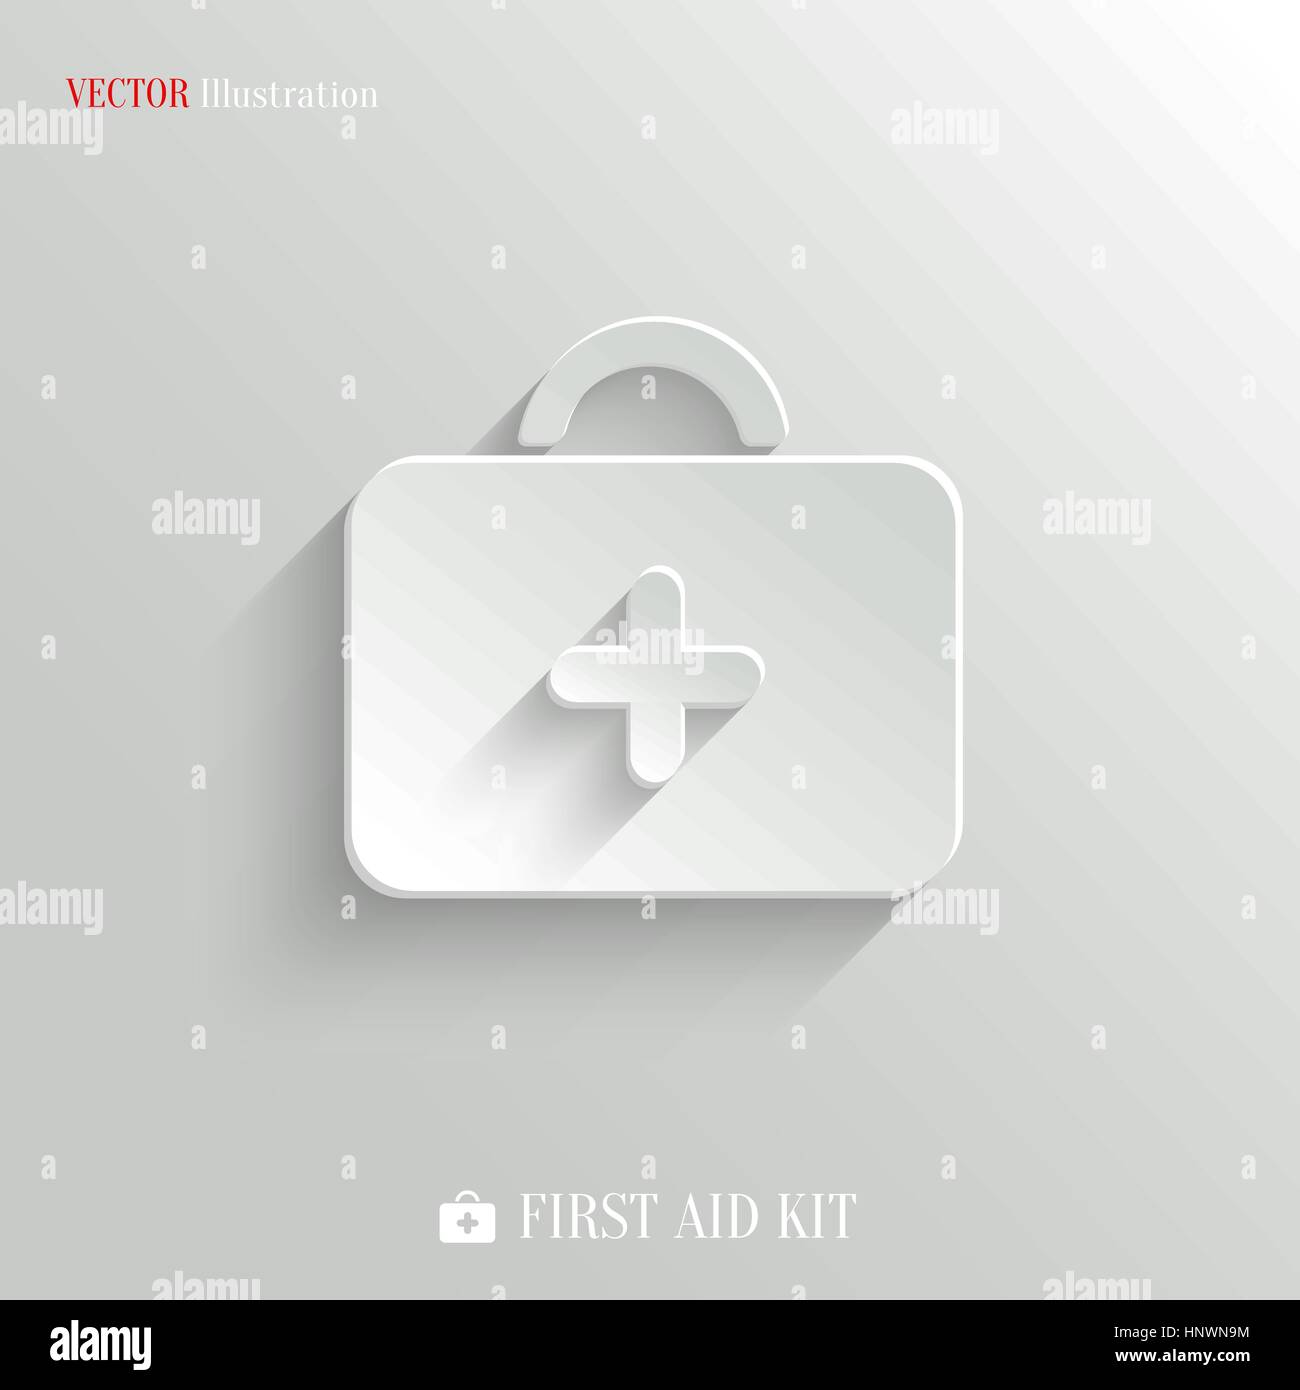 First aid. Medical Kit icon - vector web illustration, easy paste to any background Stock Vector